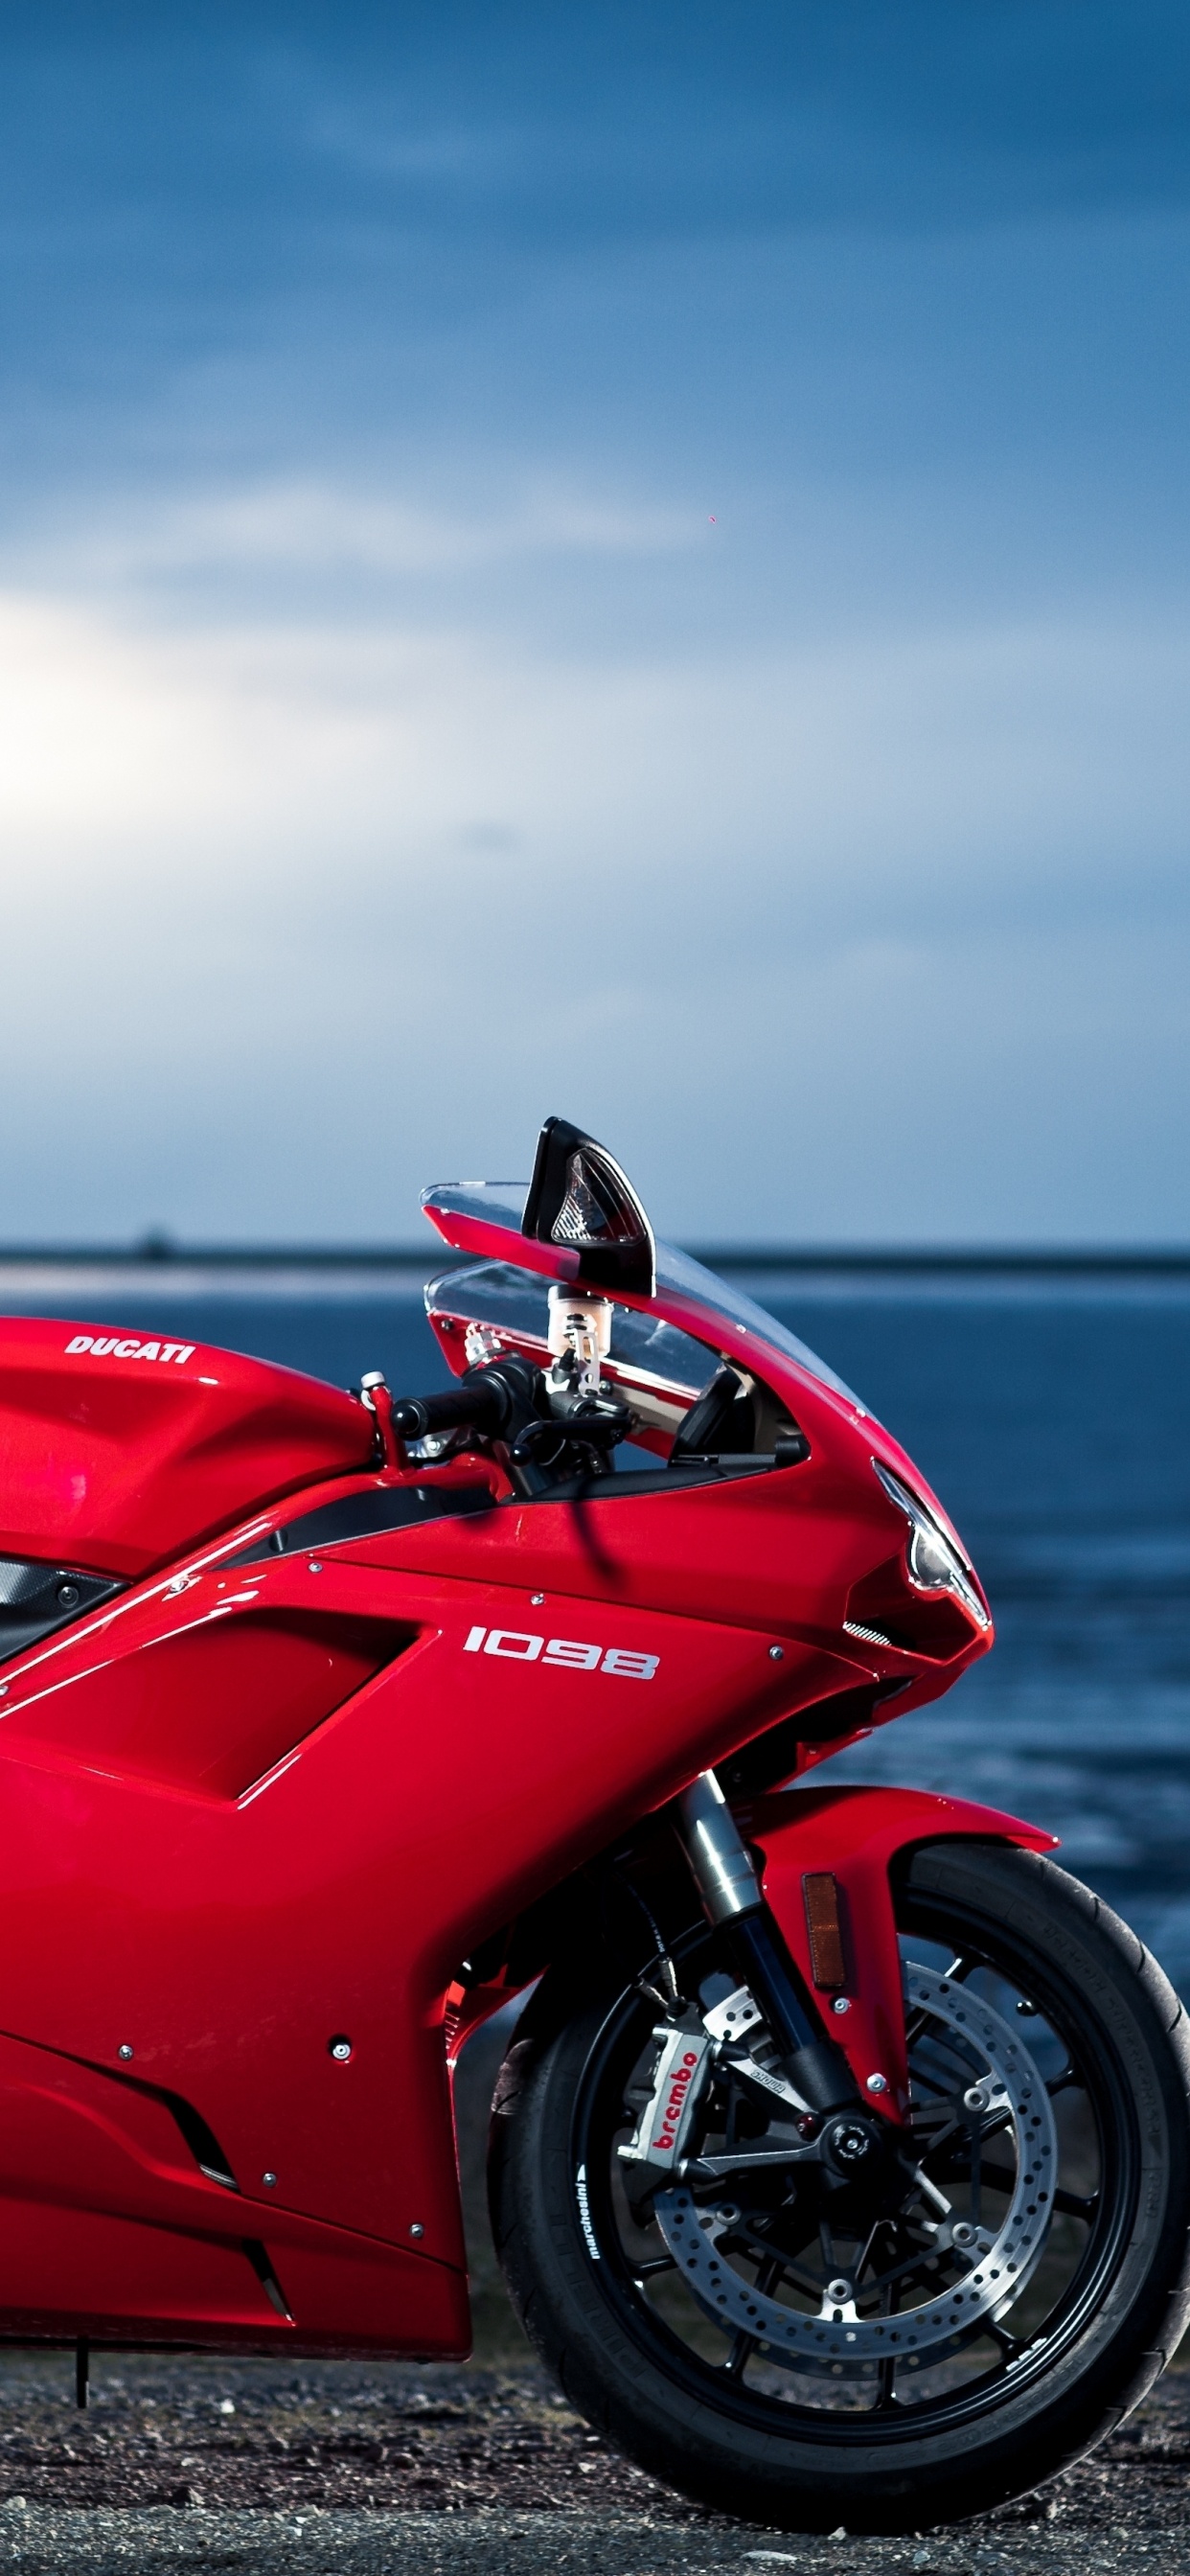 Red and Black Sports Bike on Seashore During Daytime. Wallpaper in 1242x2688 Resolution